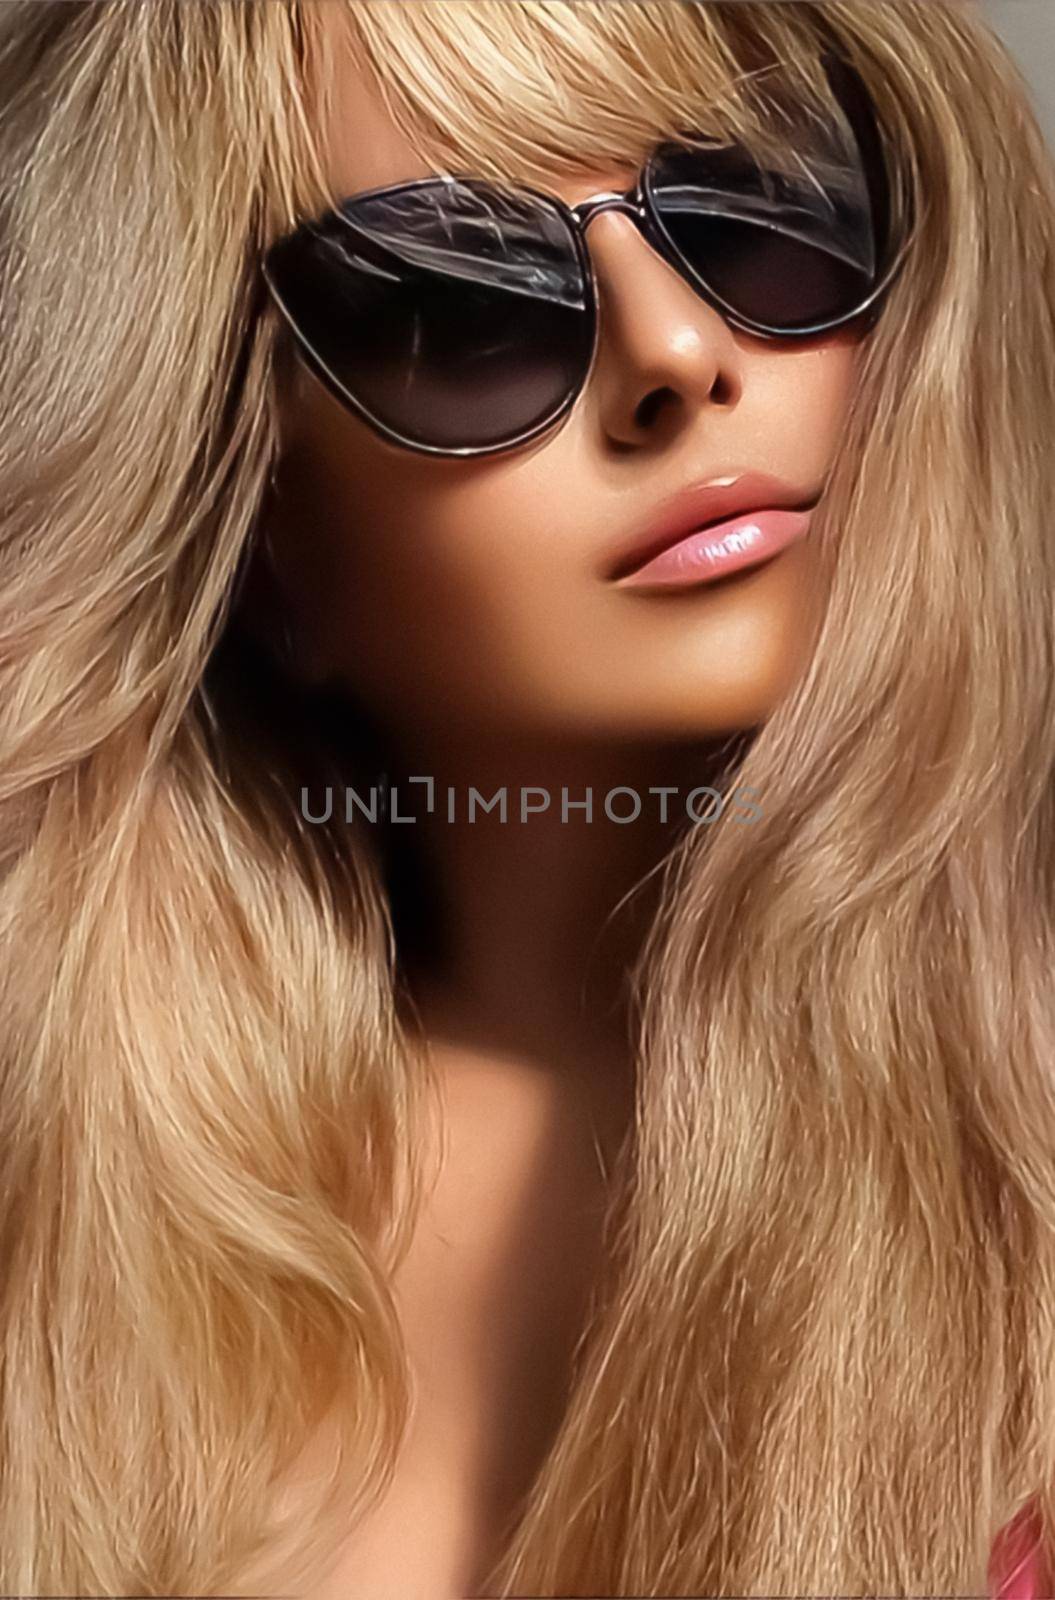 Luxury fashion, travel and beauty face portrait of young blonde woman, wearing chic sunglasses, suntanned skin and long beach waves hairstyle, summer accessory and glamour style by Anneleven